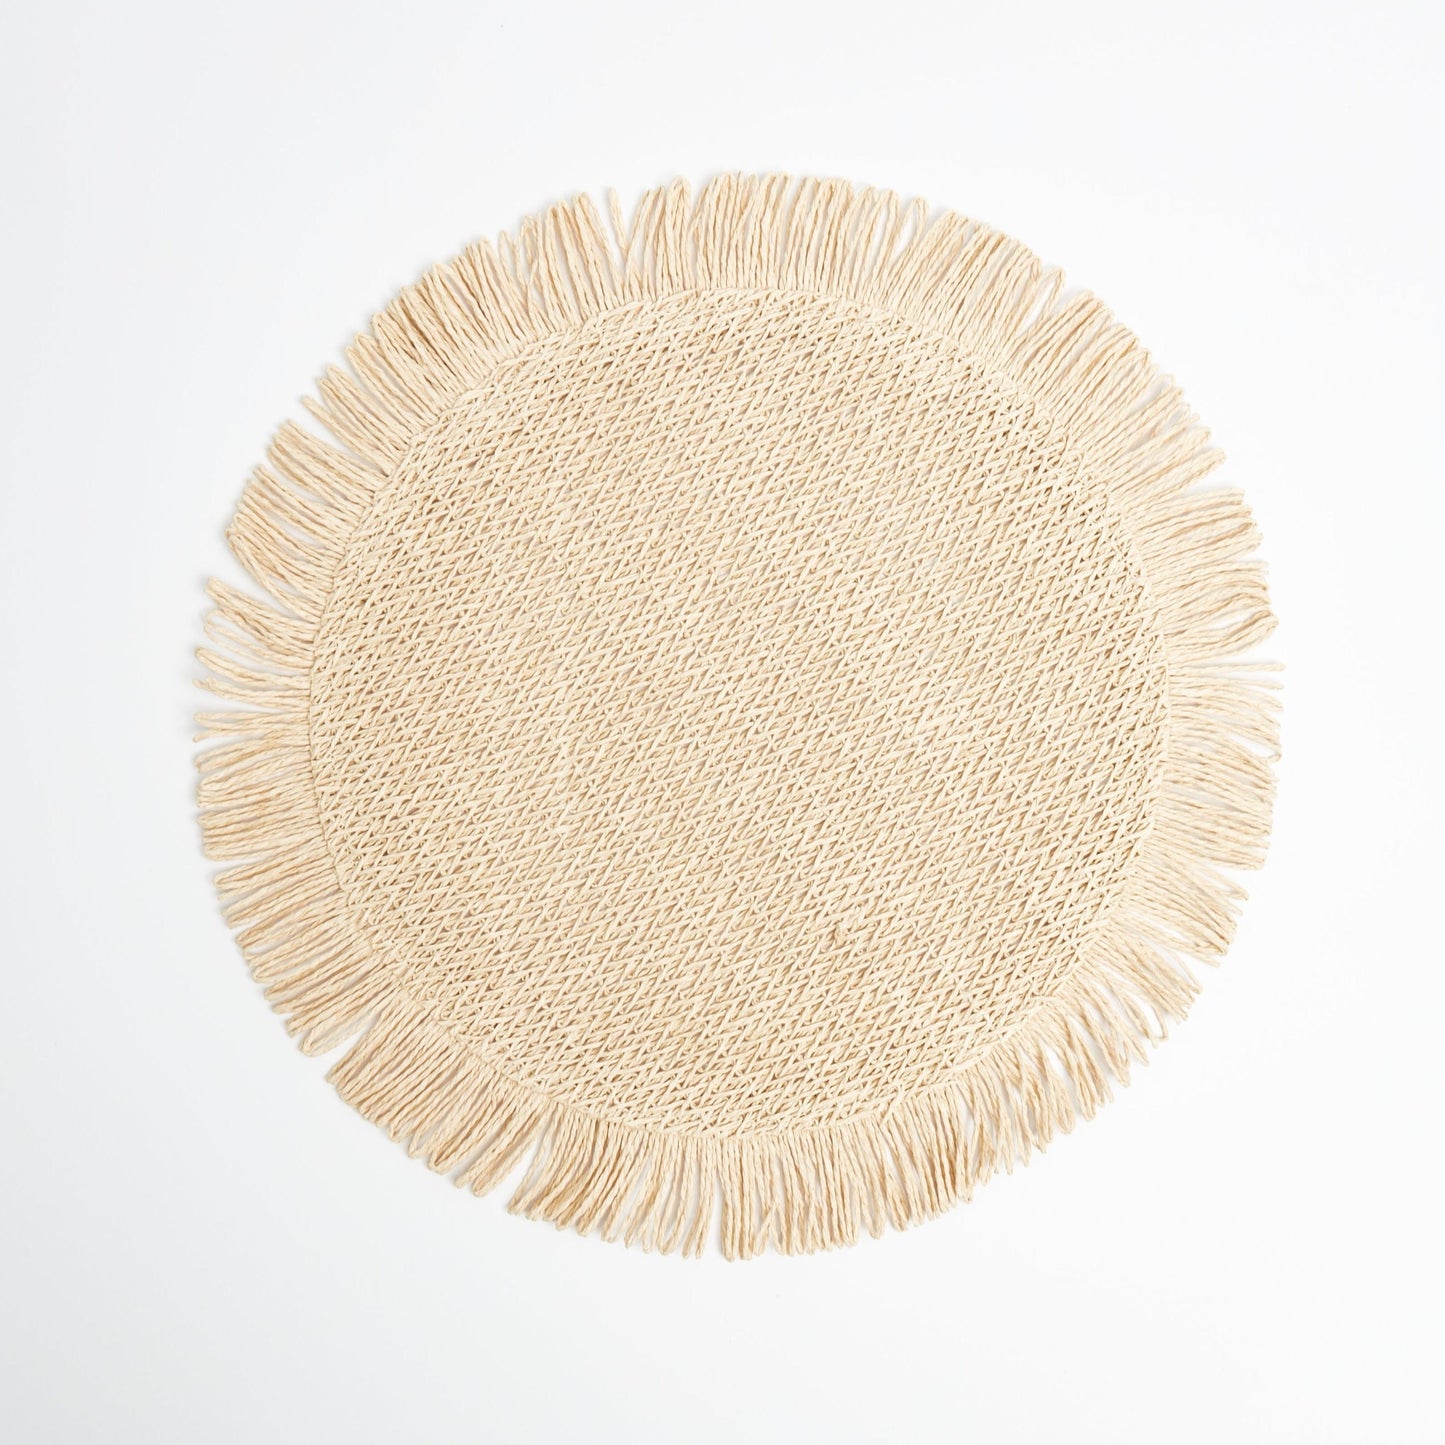 Elia Woven Rattan Round Fringed Placemats (set of 4)